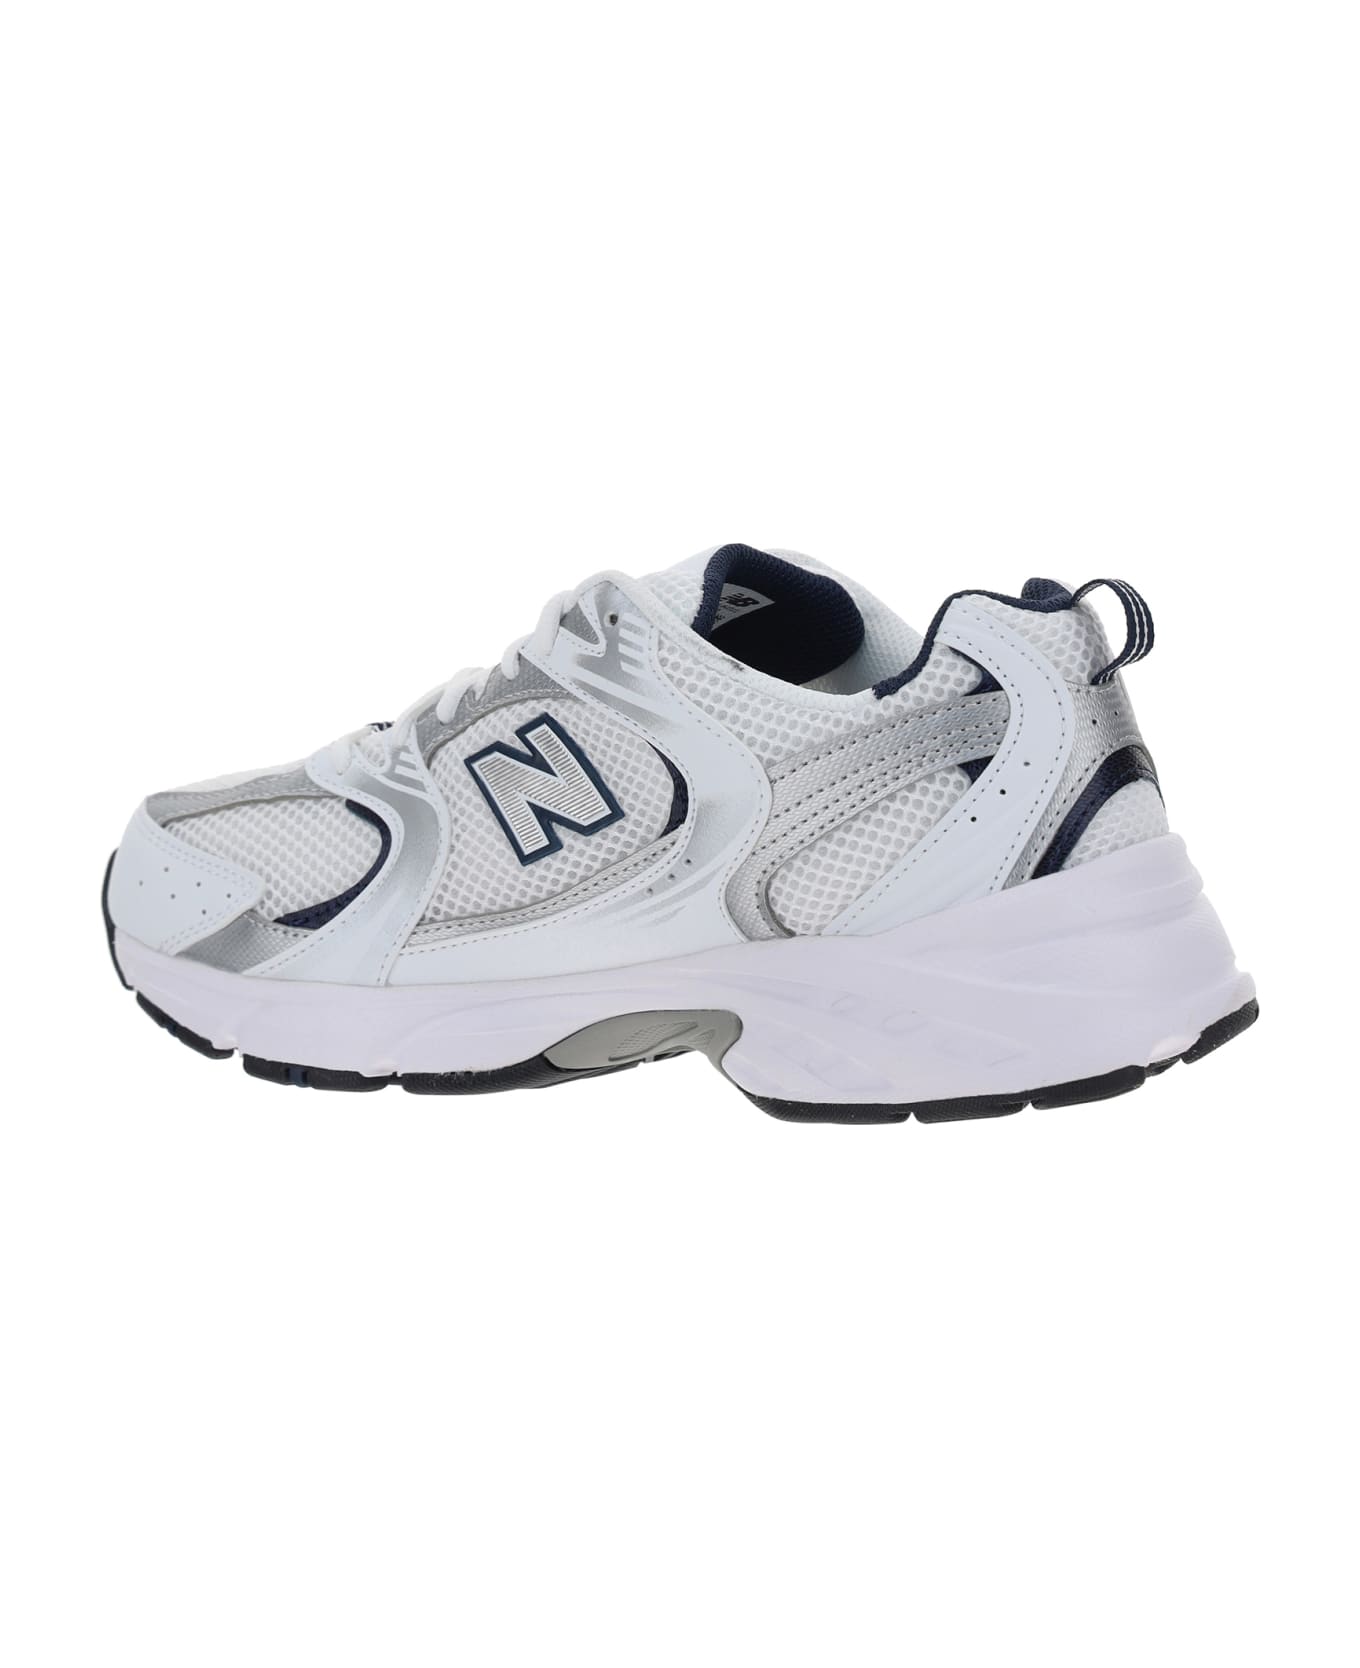 New Balance Lifestyle Sneakers - White/blue D